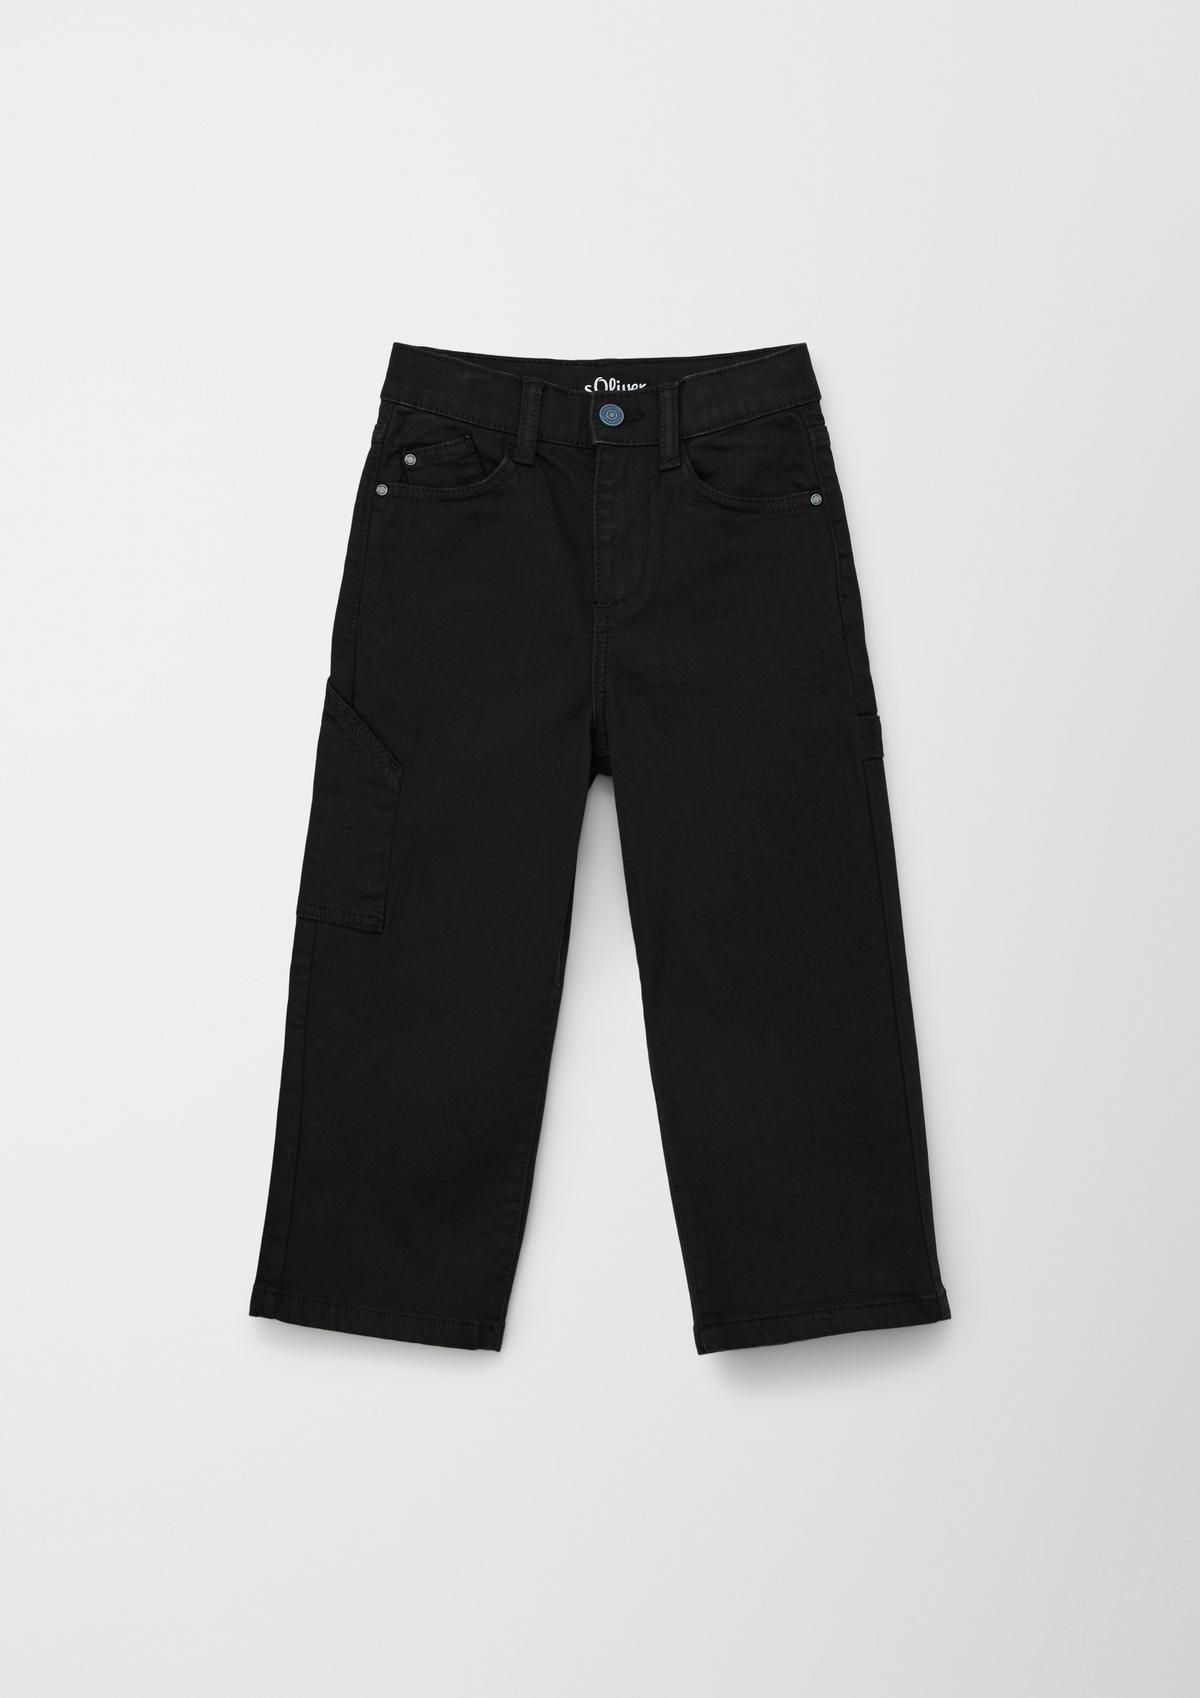 SALE: Jeans for Boys (Sizes 134-176)